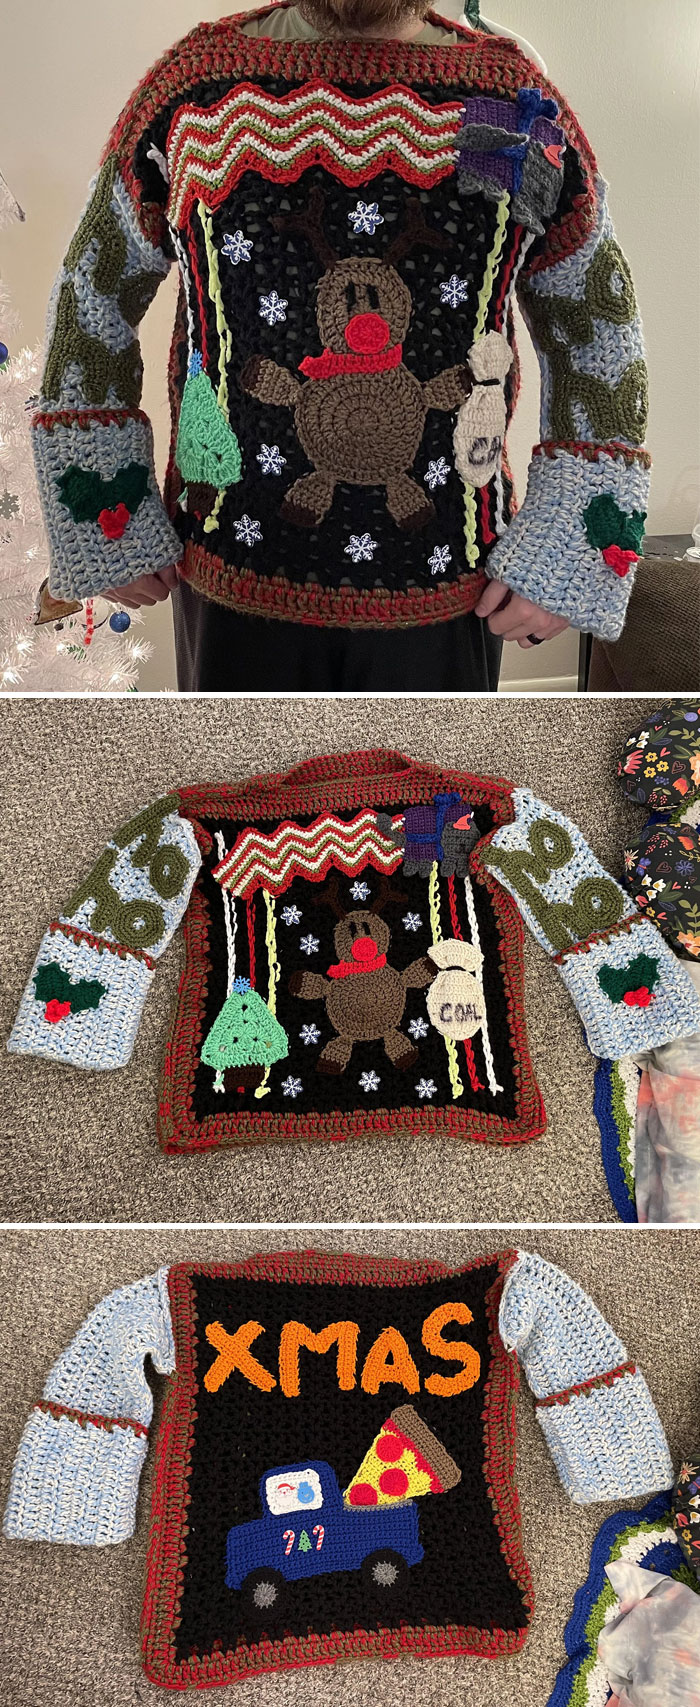 2021 Ugly Christmas Sweater! I Hope It Sparks Joy At The Contest Even If We Don't Win